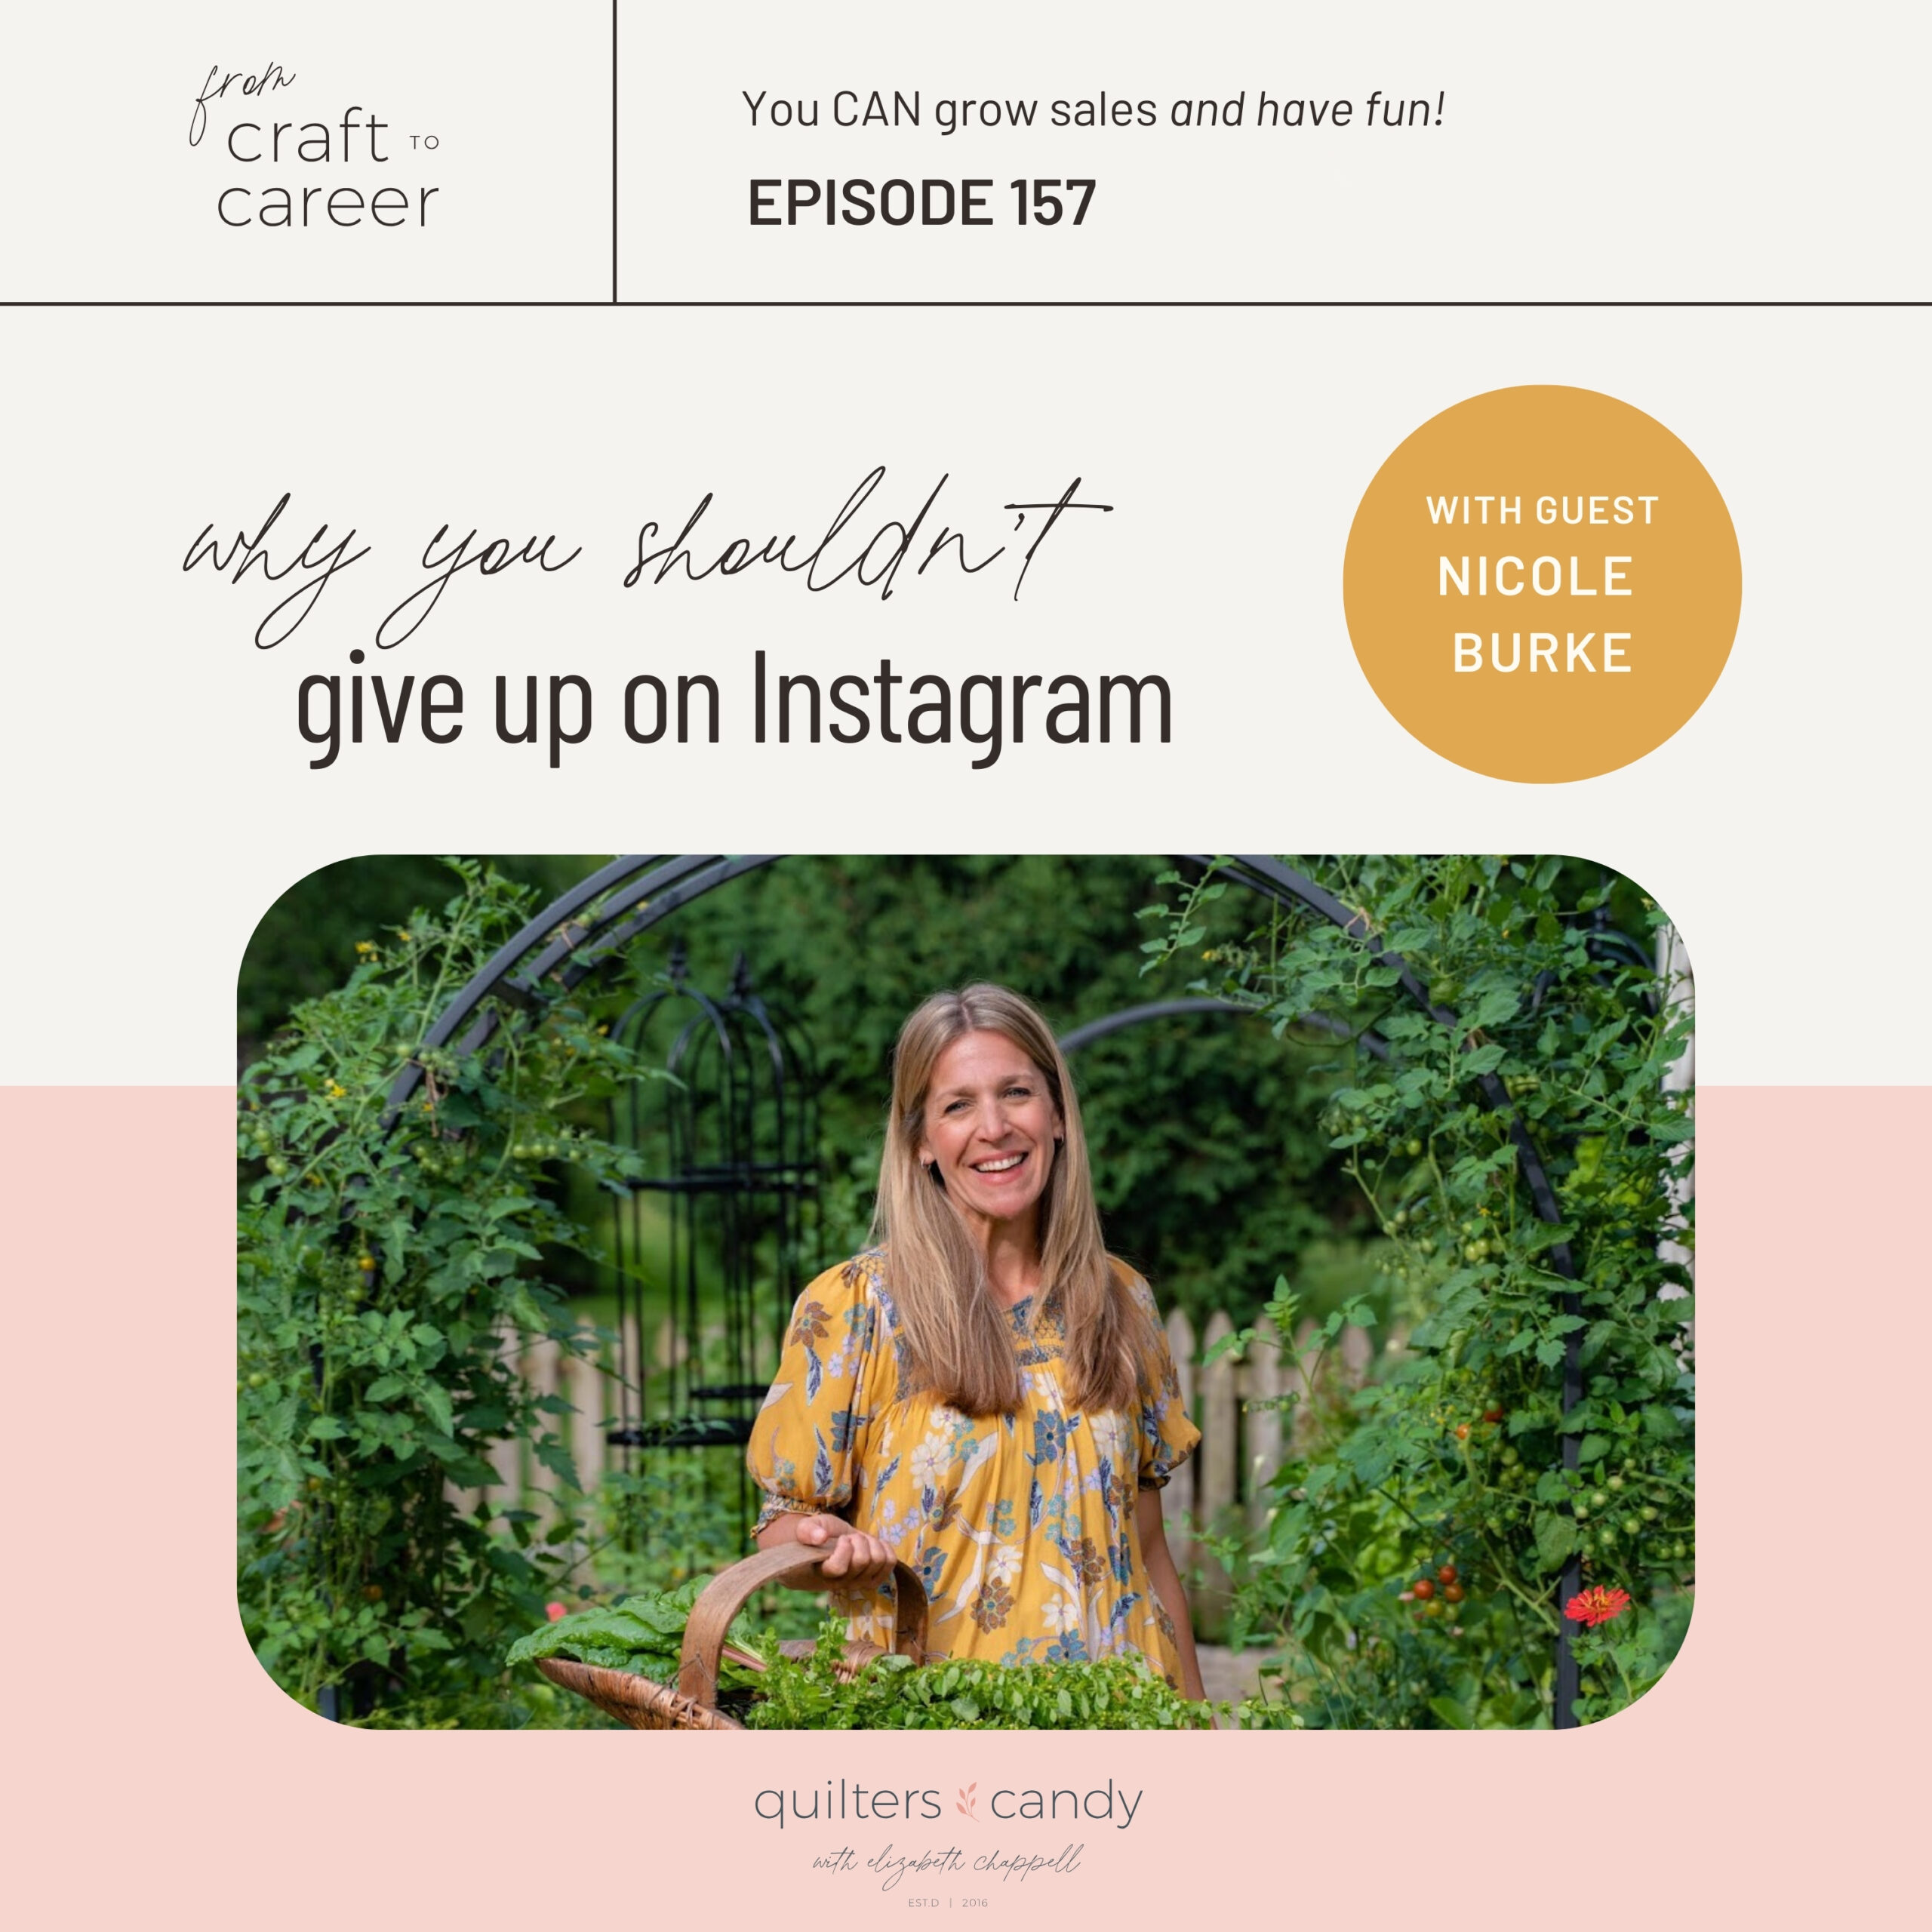 Why You Shouldn't Give Up on Instagram, featuring guest Nicole Burke from "From Craft to Career" podcast, episode 157, presented by Quilters Candy. Nicole is pictured in a garden.